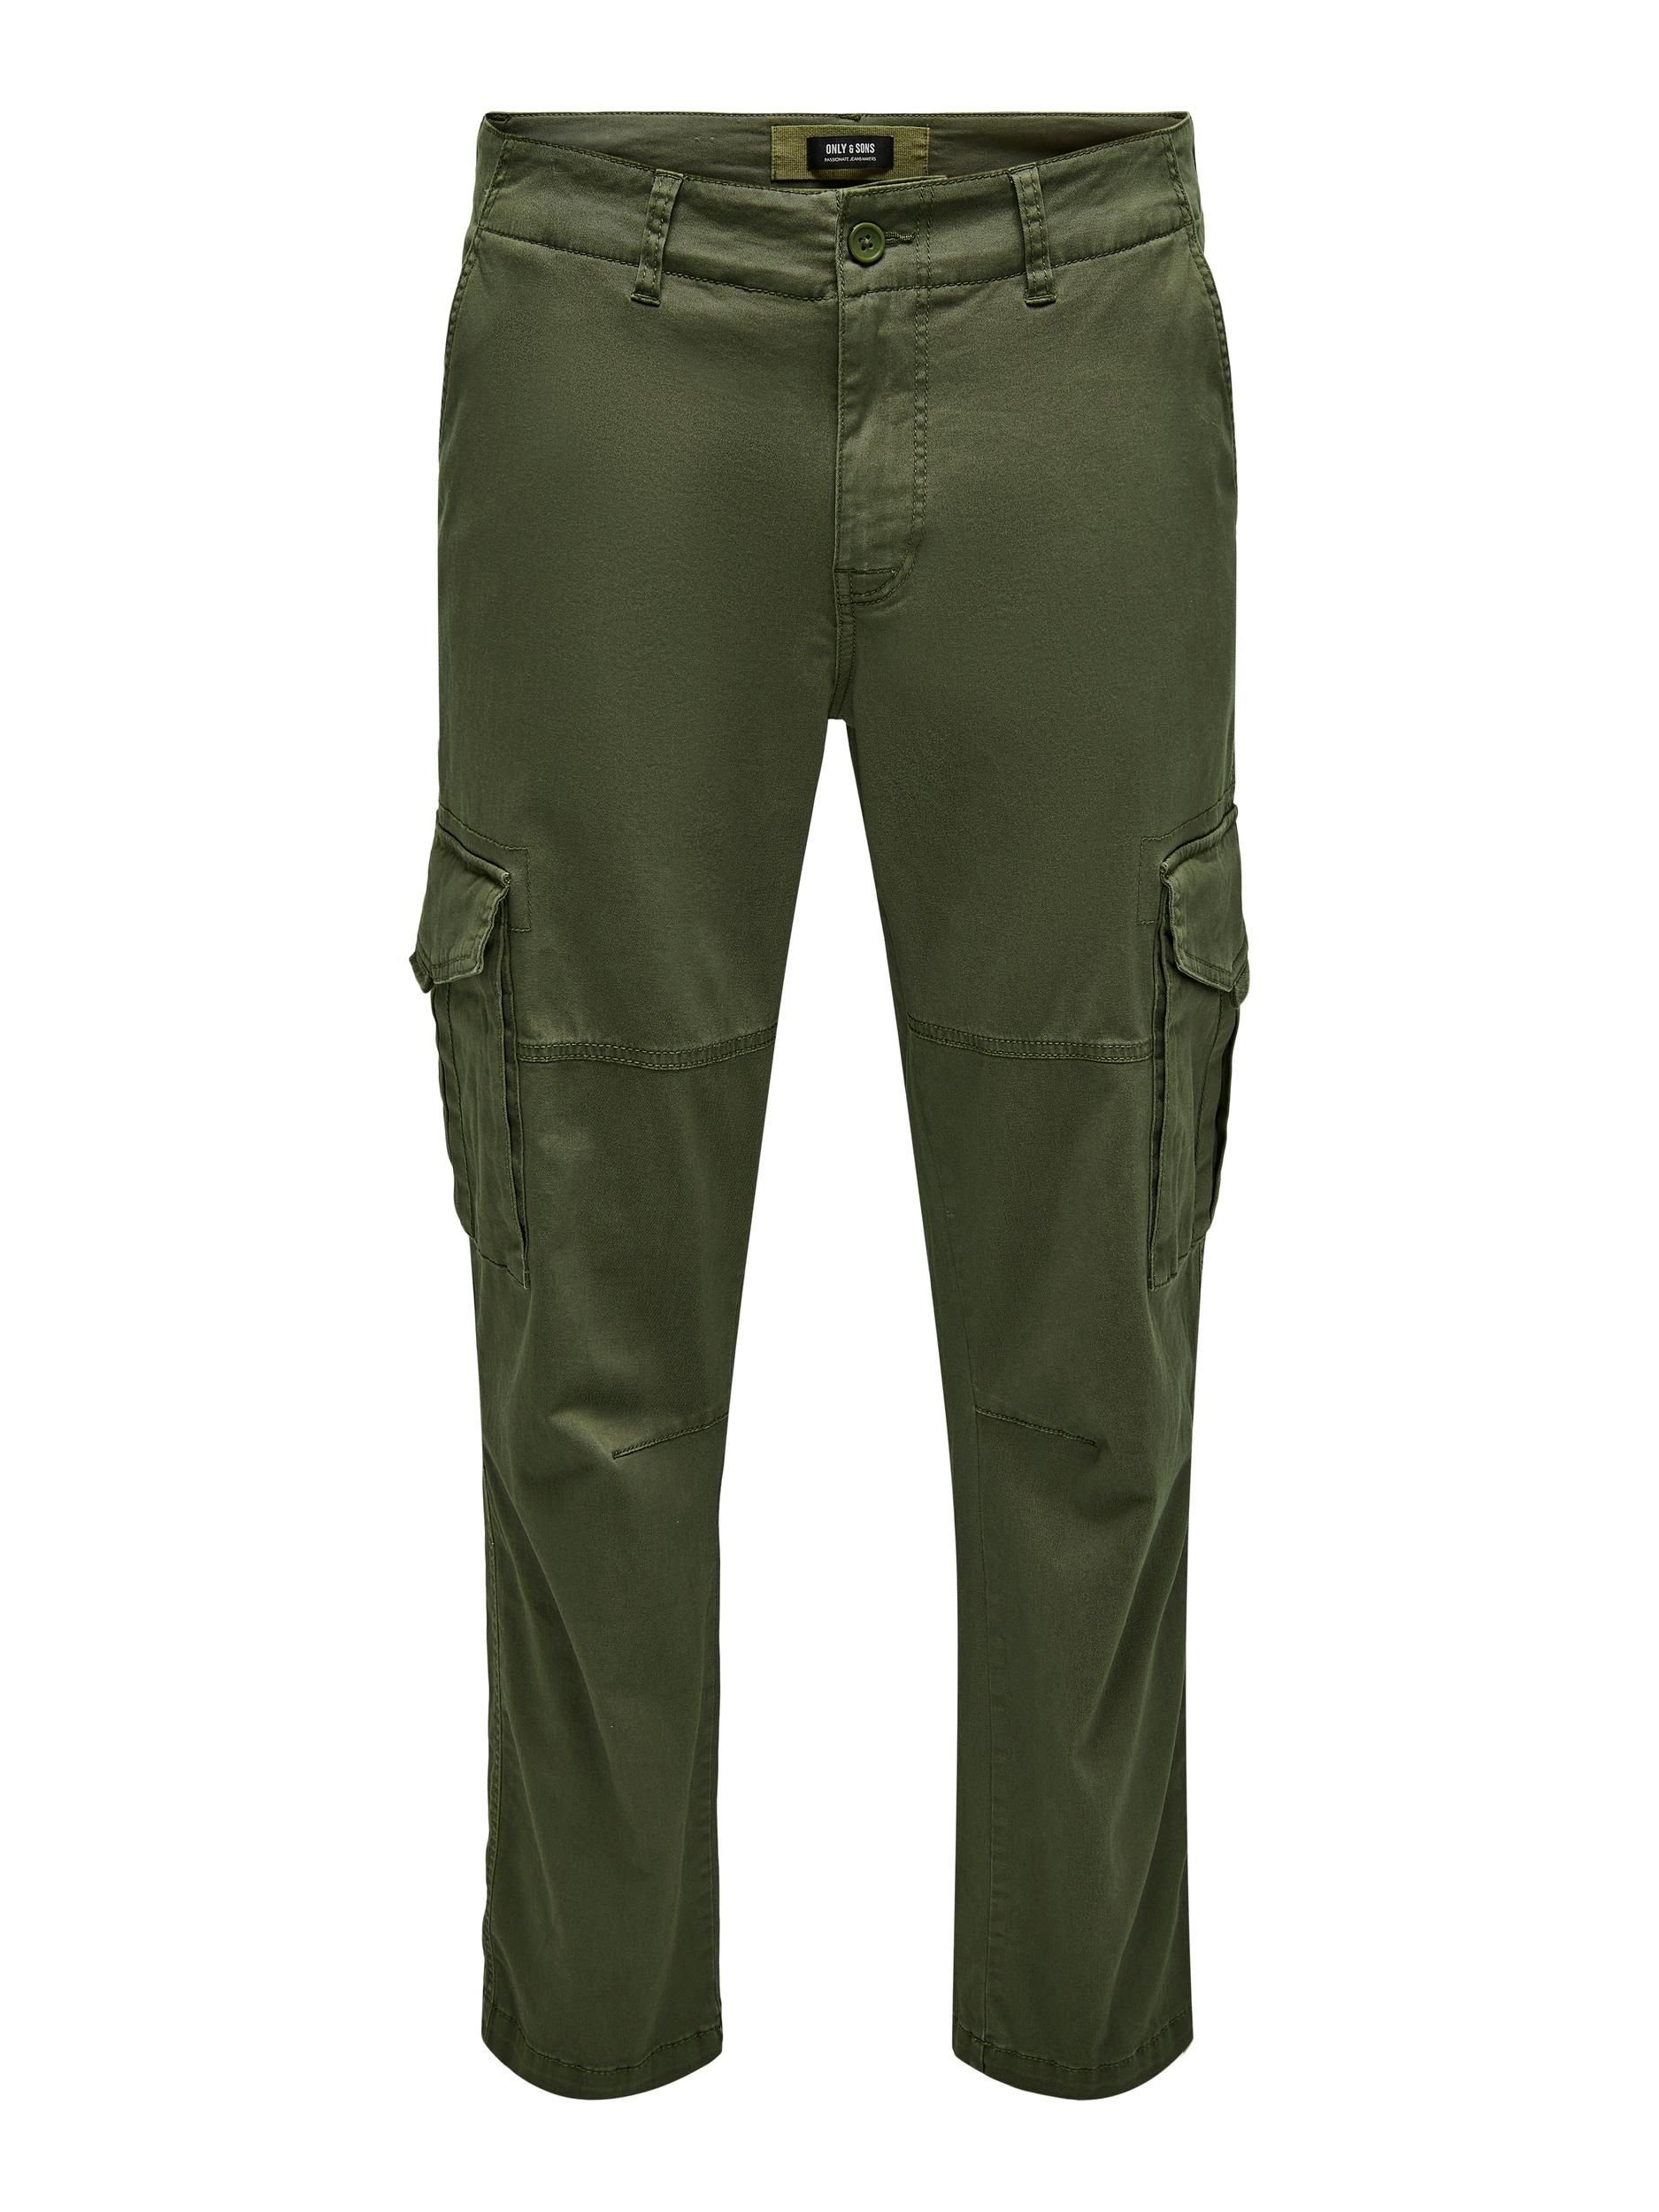 & Olive ONLY Night SONS Chinos